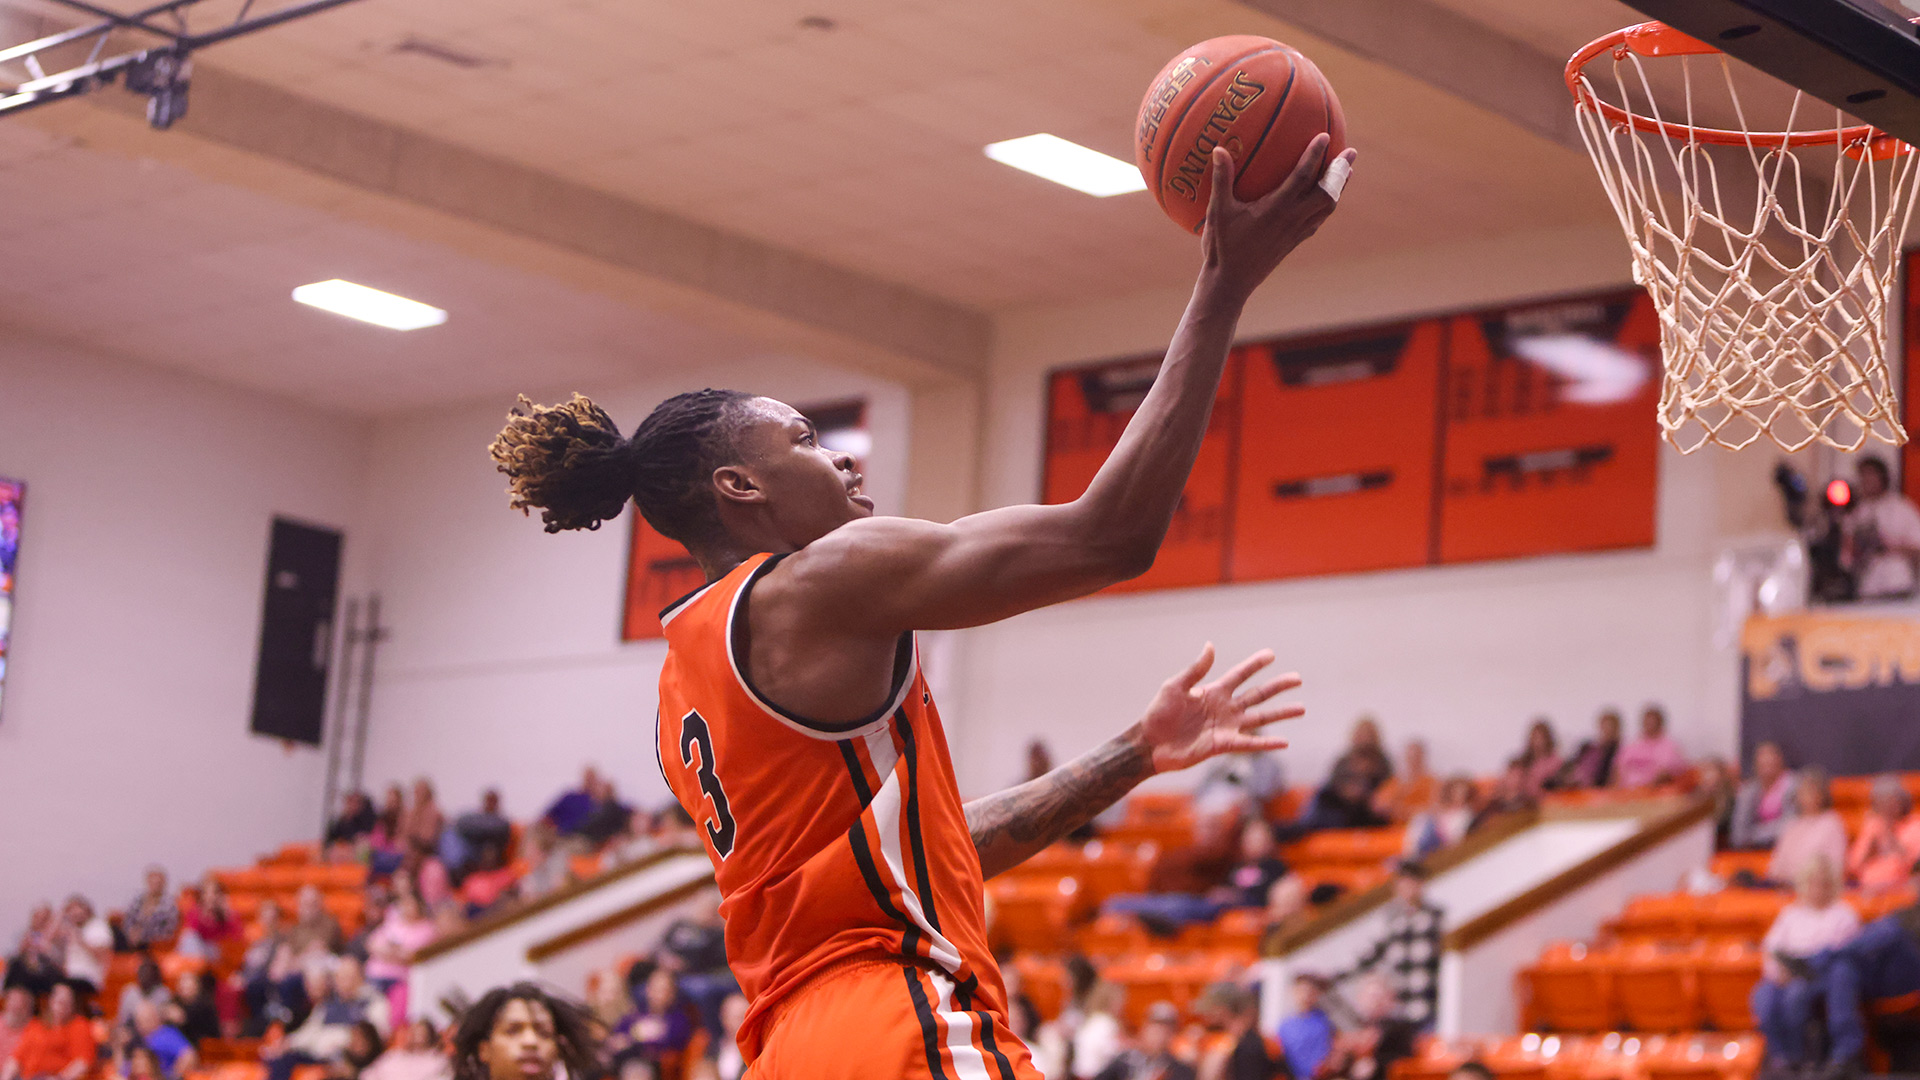 Tigers pull away from pesky Colby squad to earn 91-81 road win